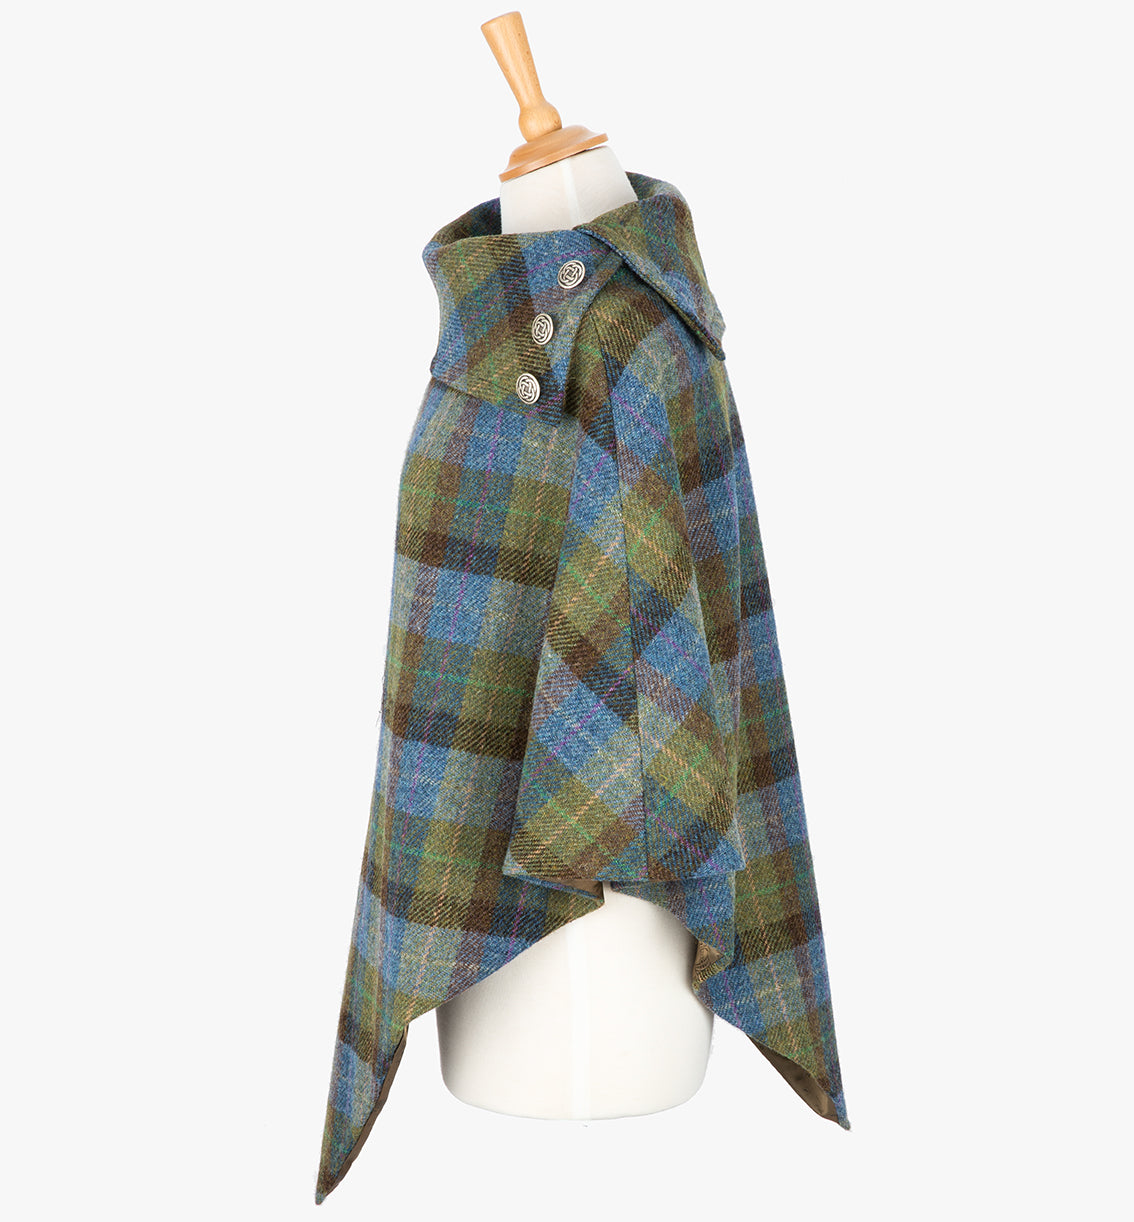 Side view the poncho in Denim Sage check. It drops over the head and drapes gently over the shoulders. It comes mid-way down the arms and finishes at a point at the front. The colour is blue, green and brown check. It has a folded collar with 3 Celtic buttons in silver.